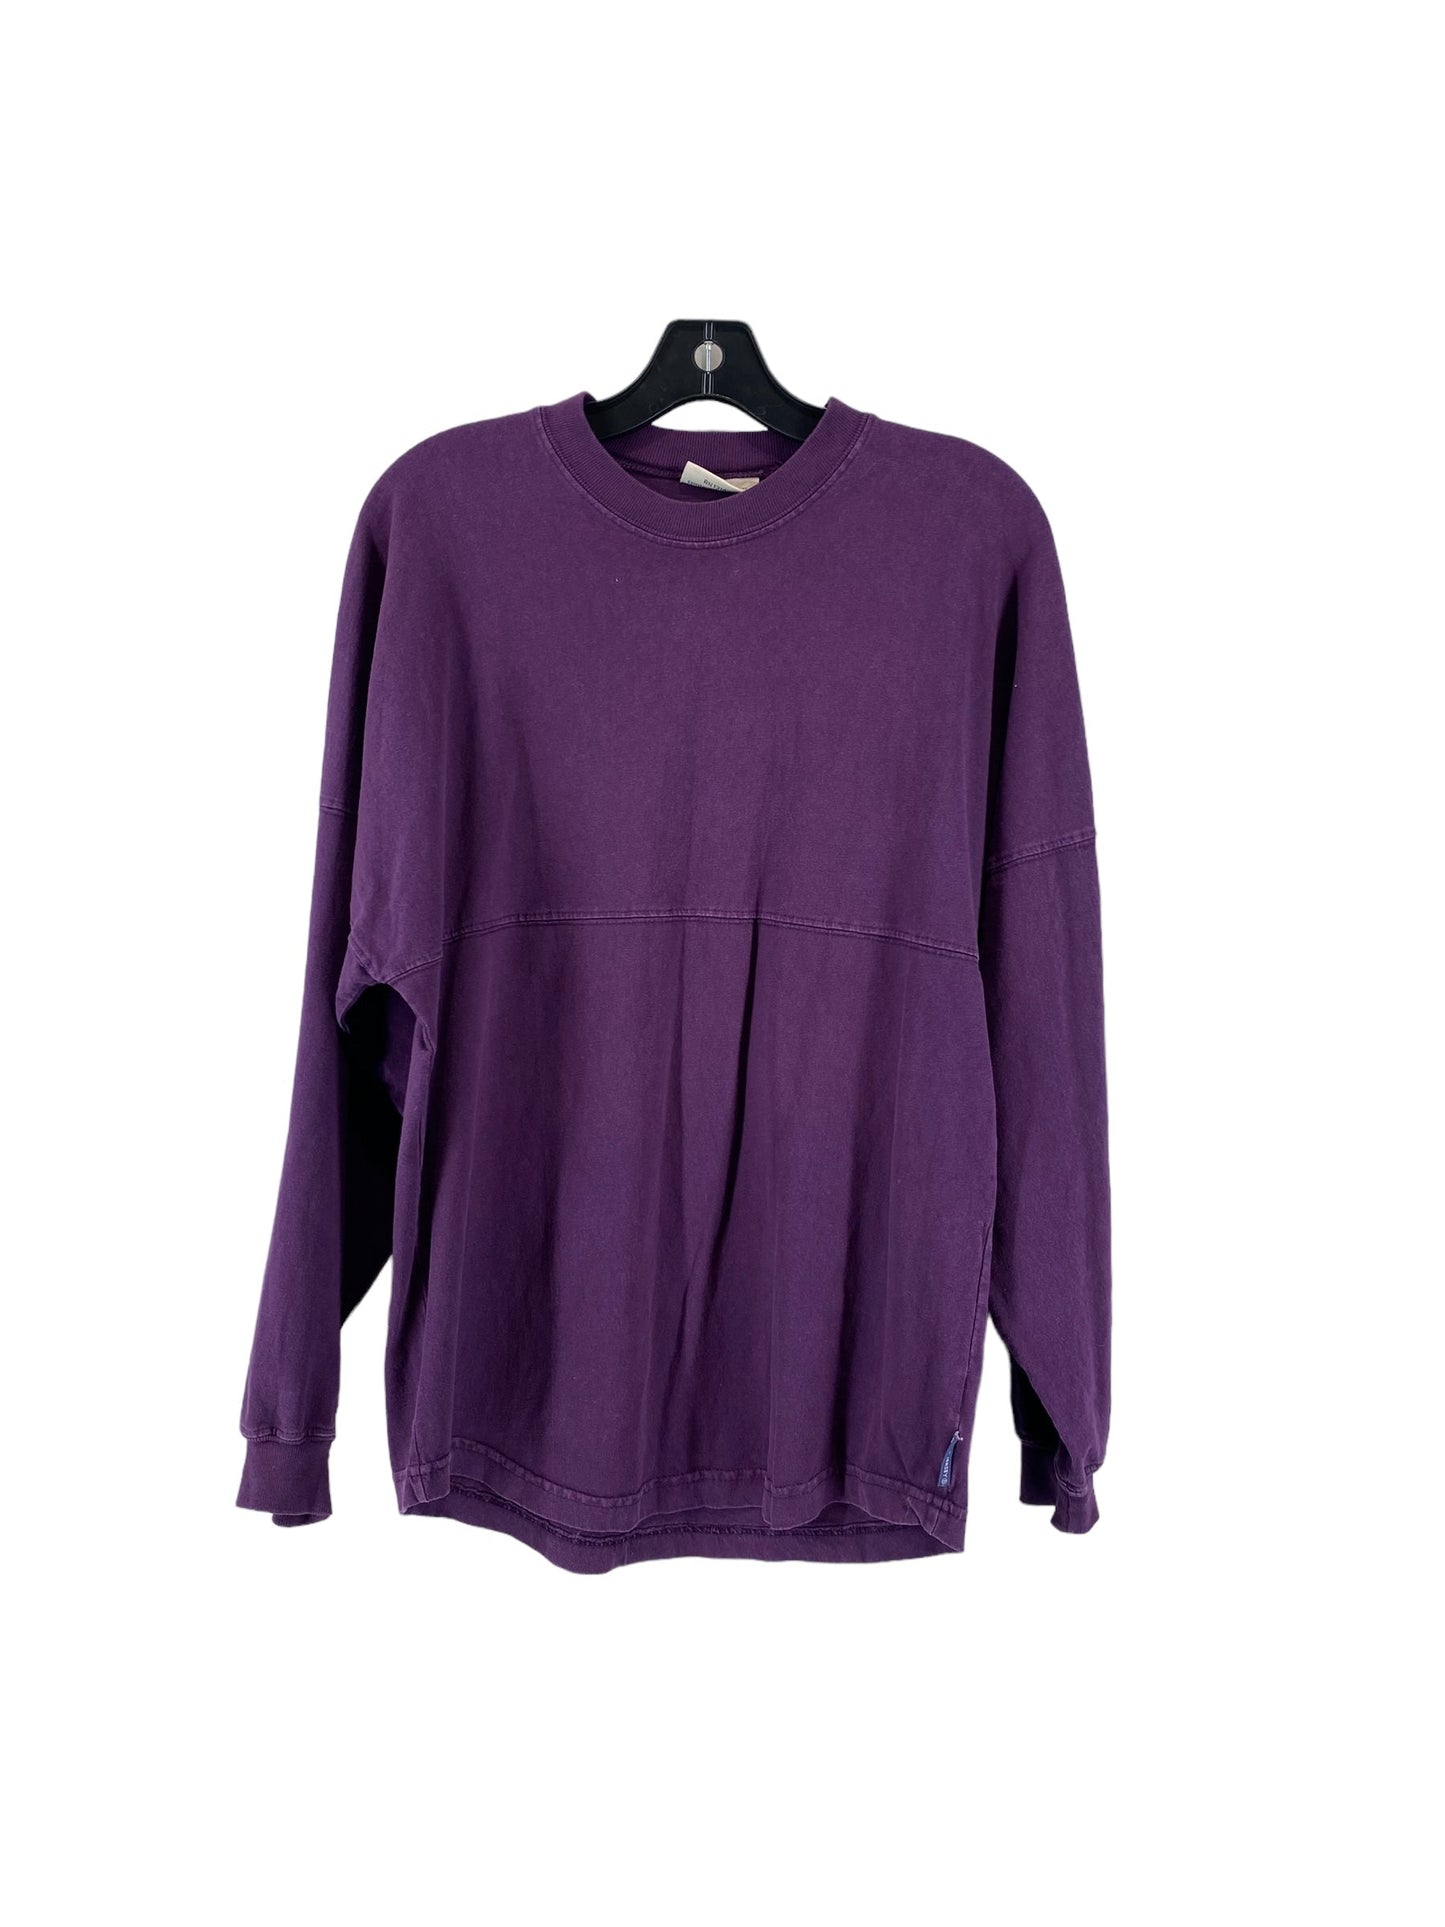 Purple Top Long Sleeve Clothes Mentor, Size Xs